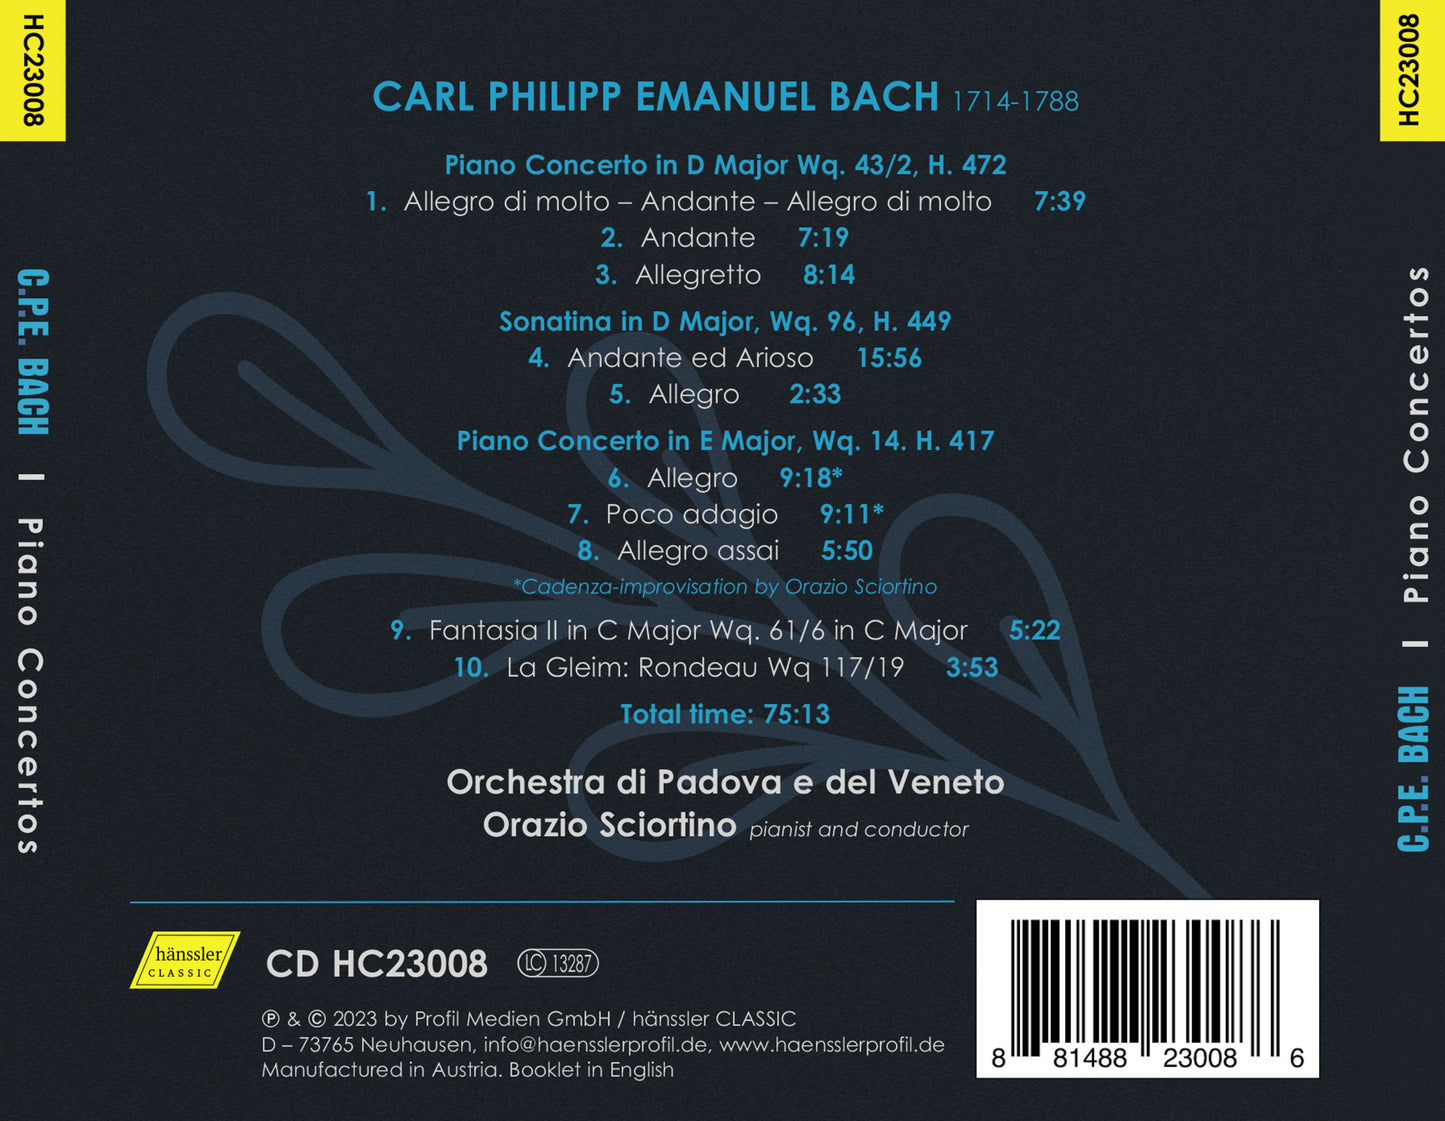 C.P.E. Bach: Piano Concertos & Other Works For Solo Piano